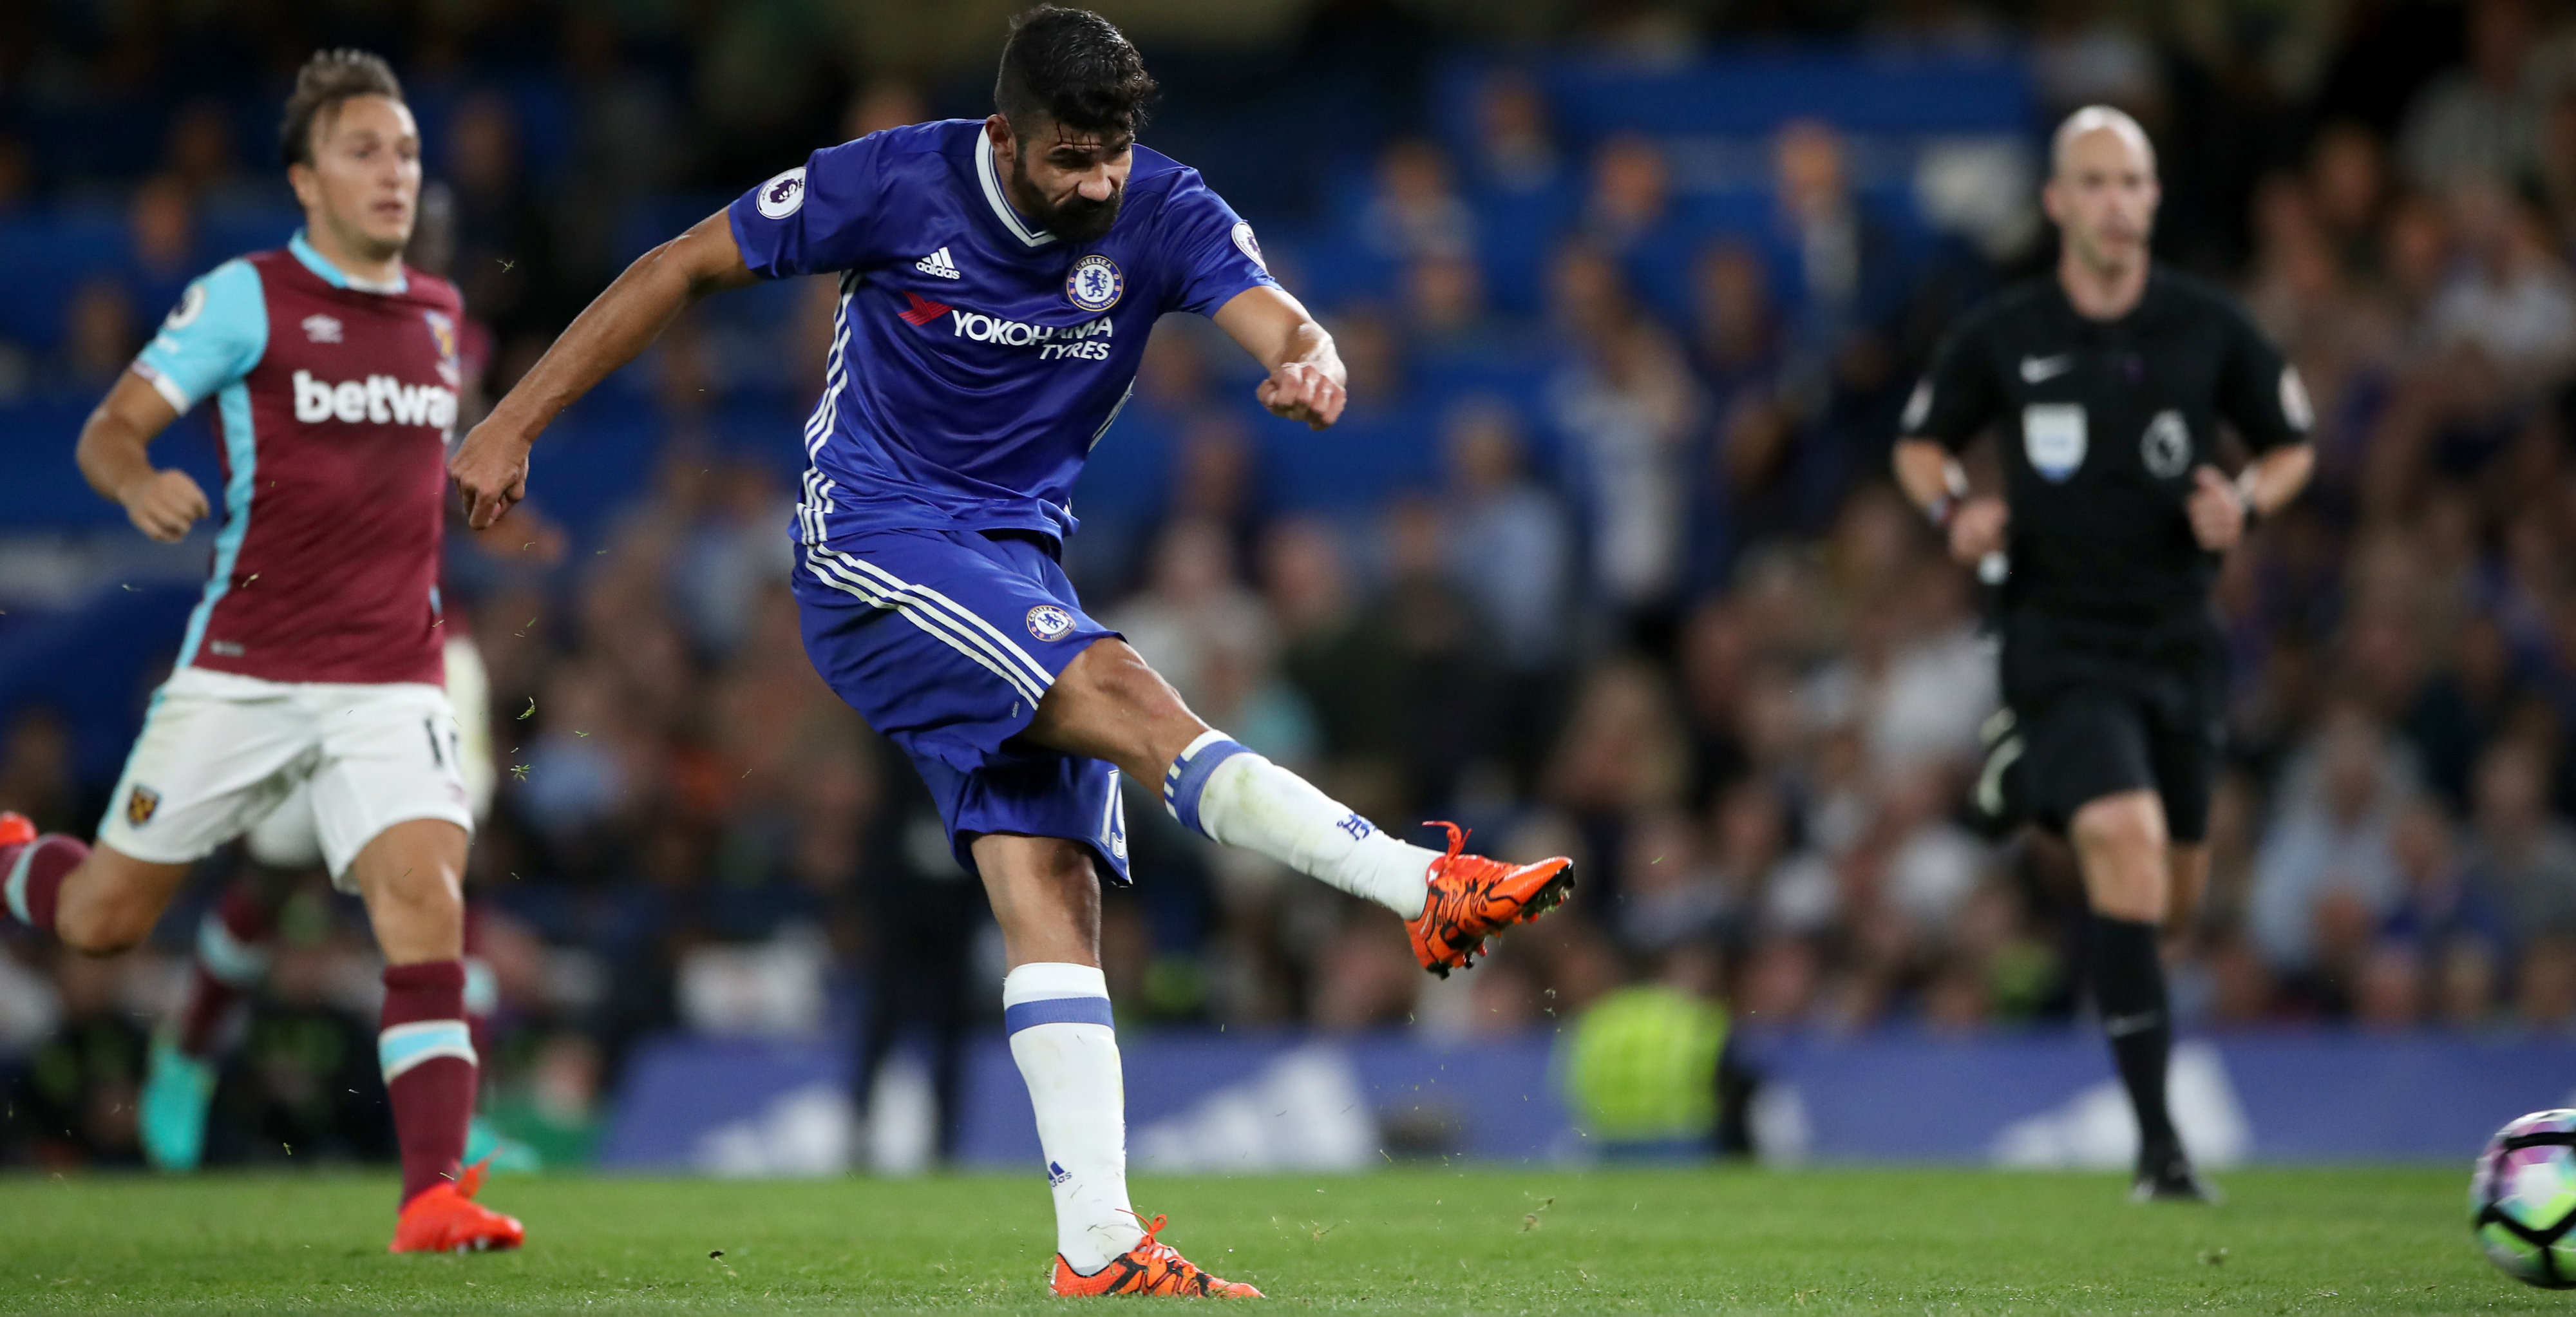 Diego Costa fired home the winner in the final minute against West Ham